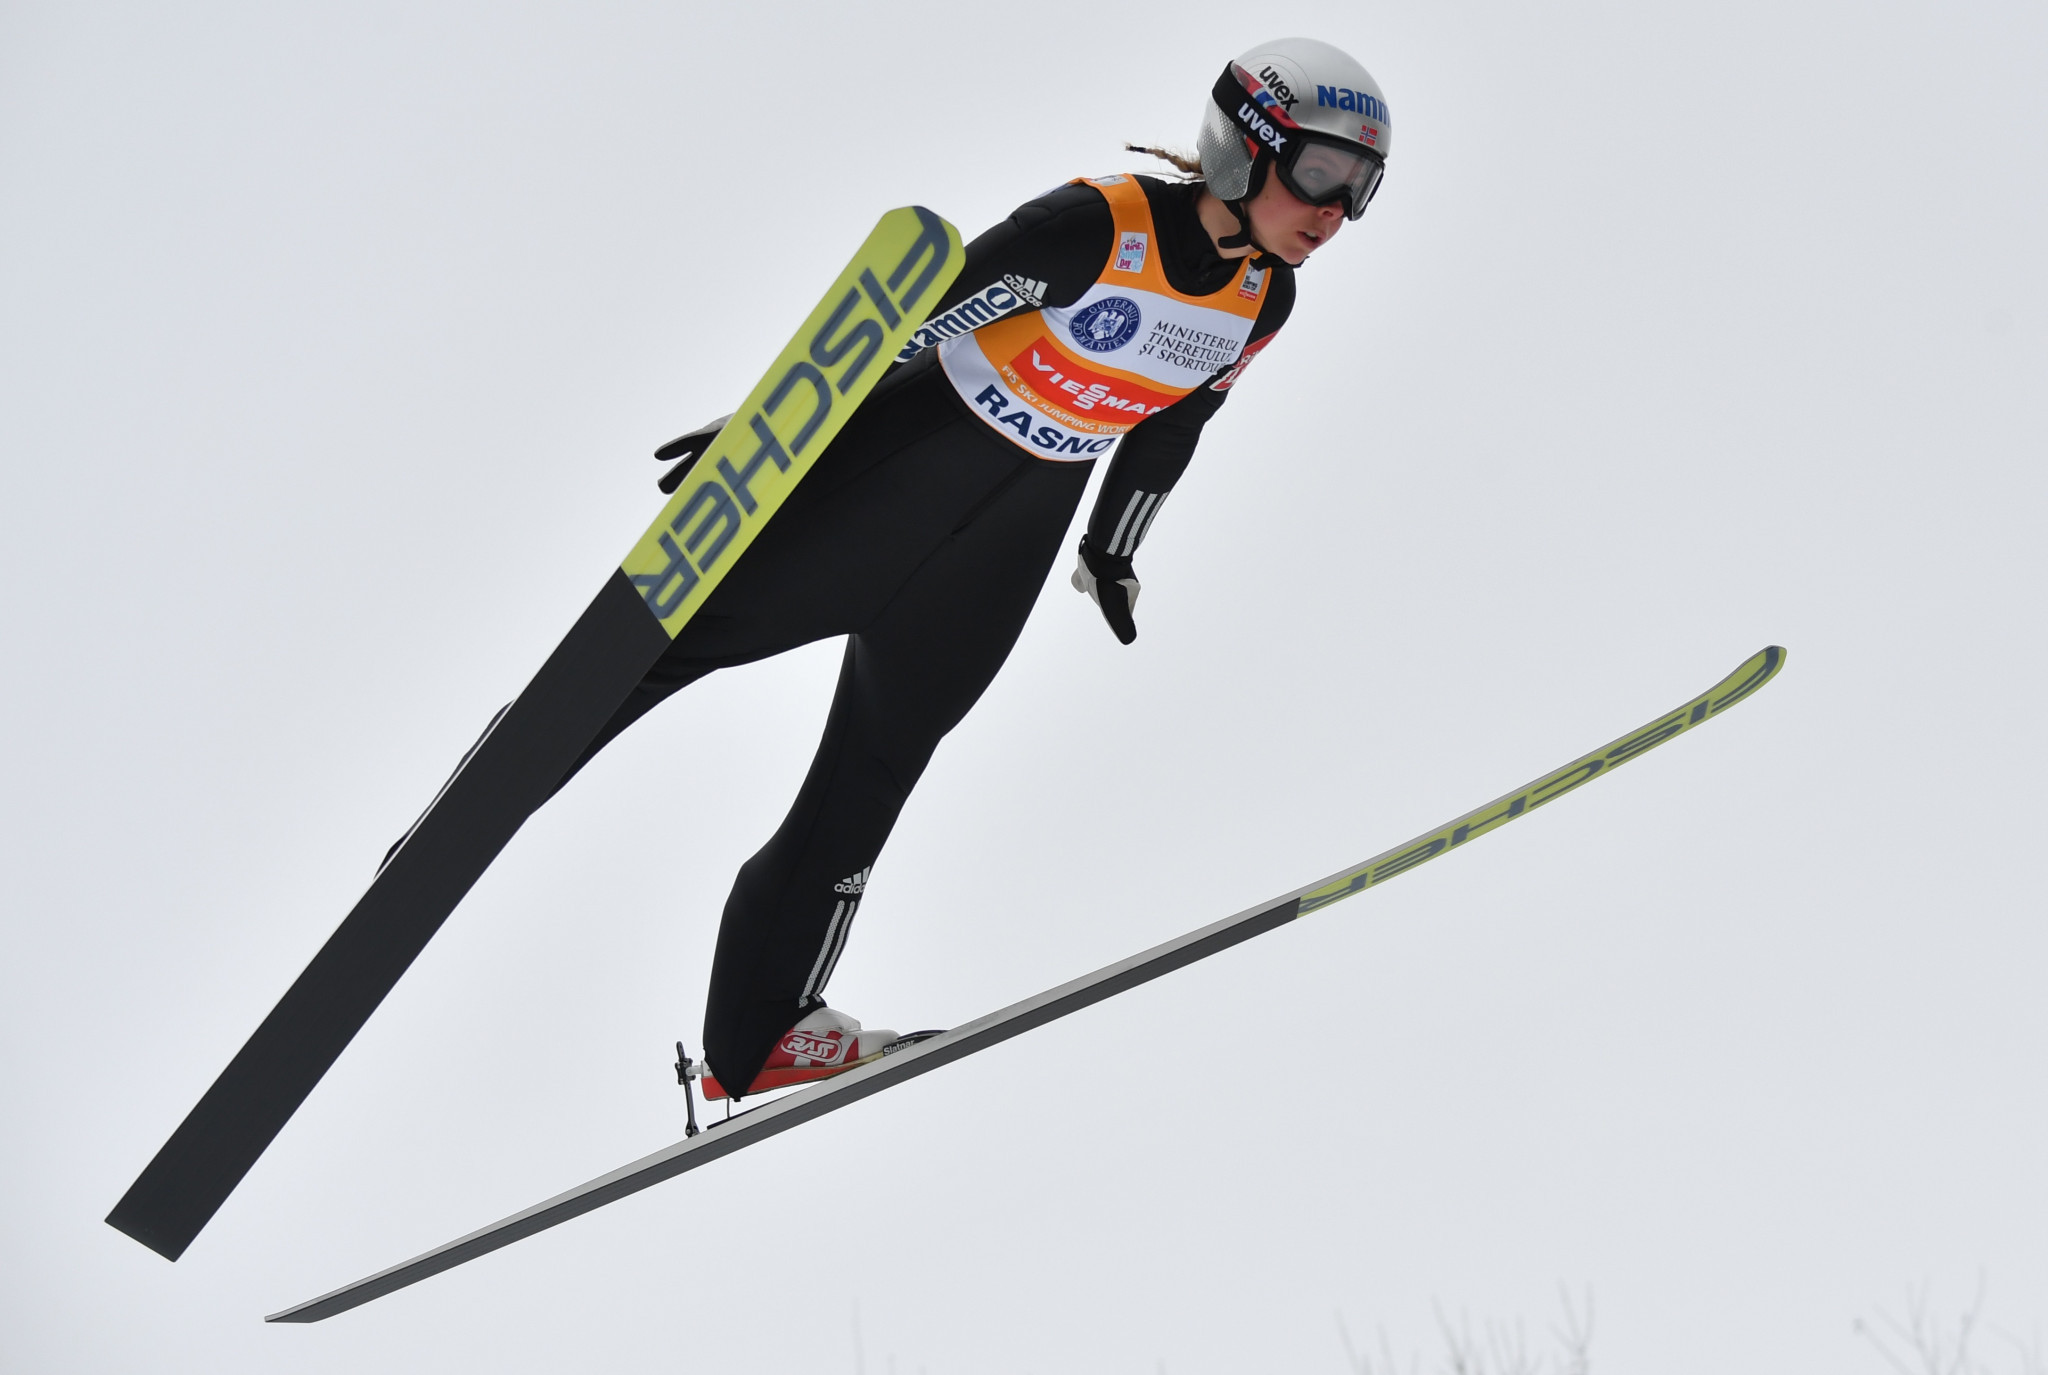 Reigning Olympic champion Maren Lundby won at the women's FIS Ski Jumping World Cup event in Rasnov ©Getty Images